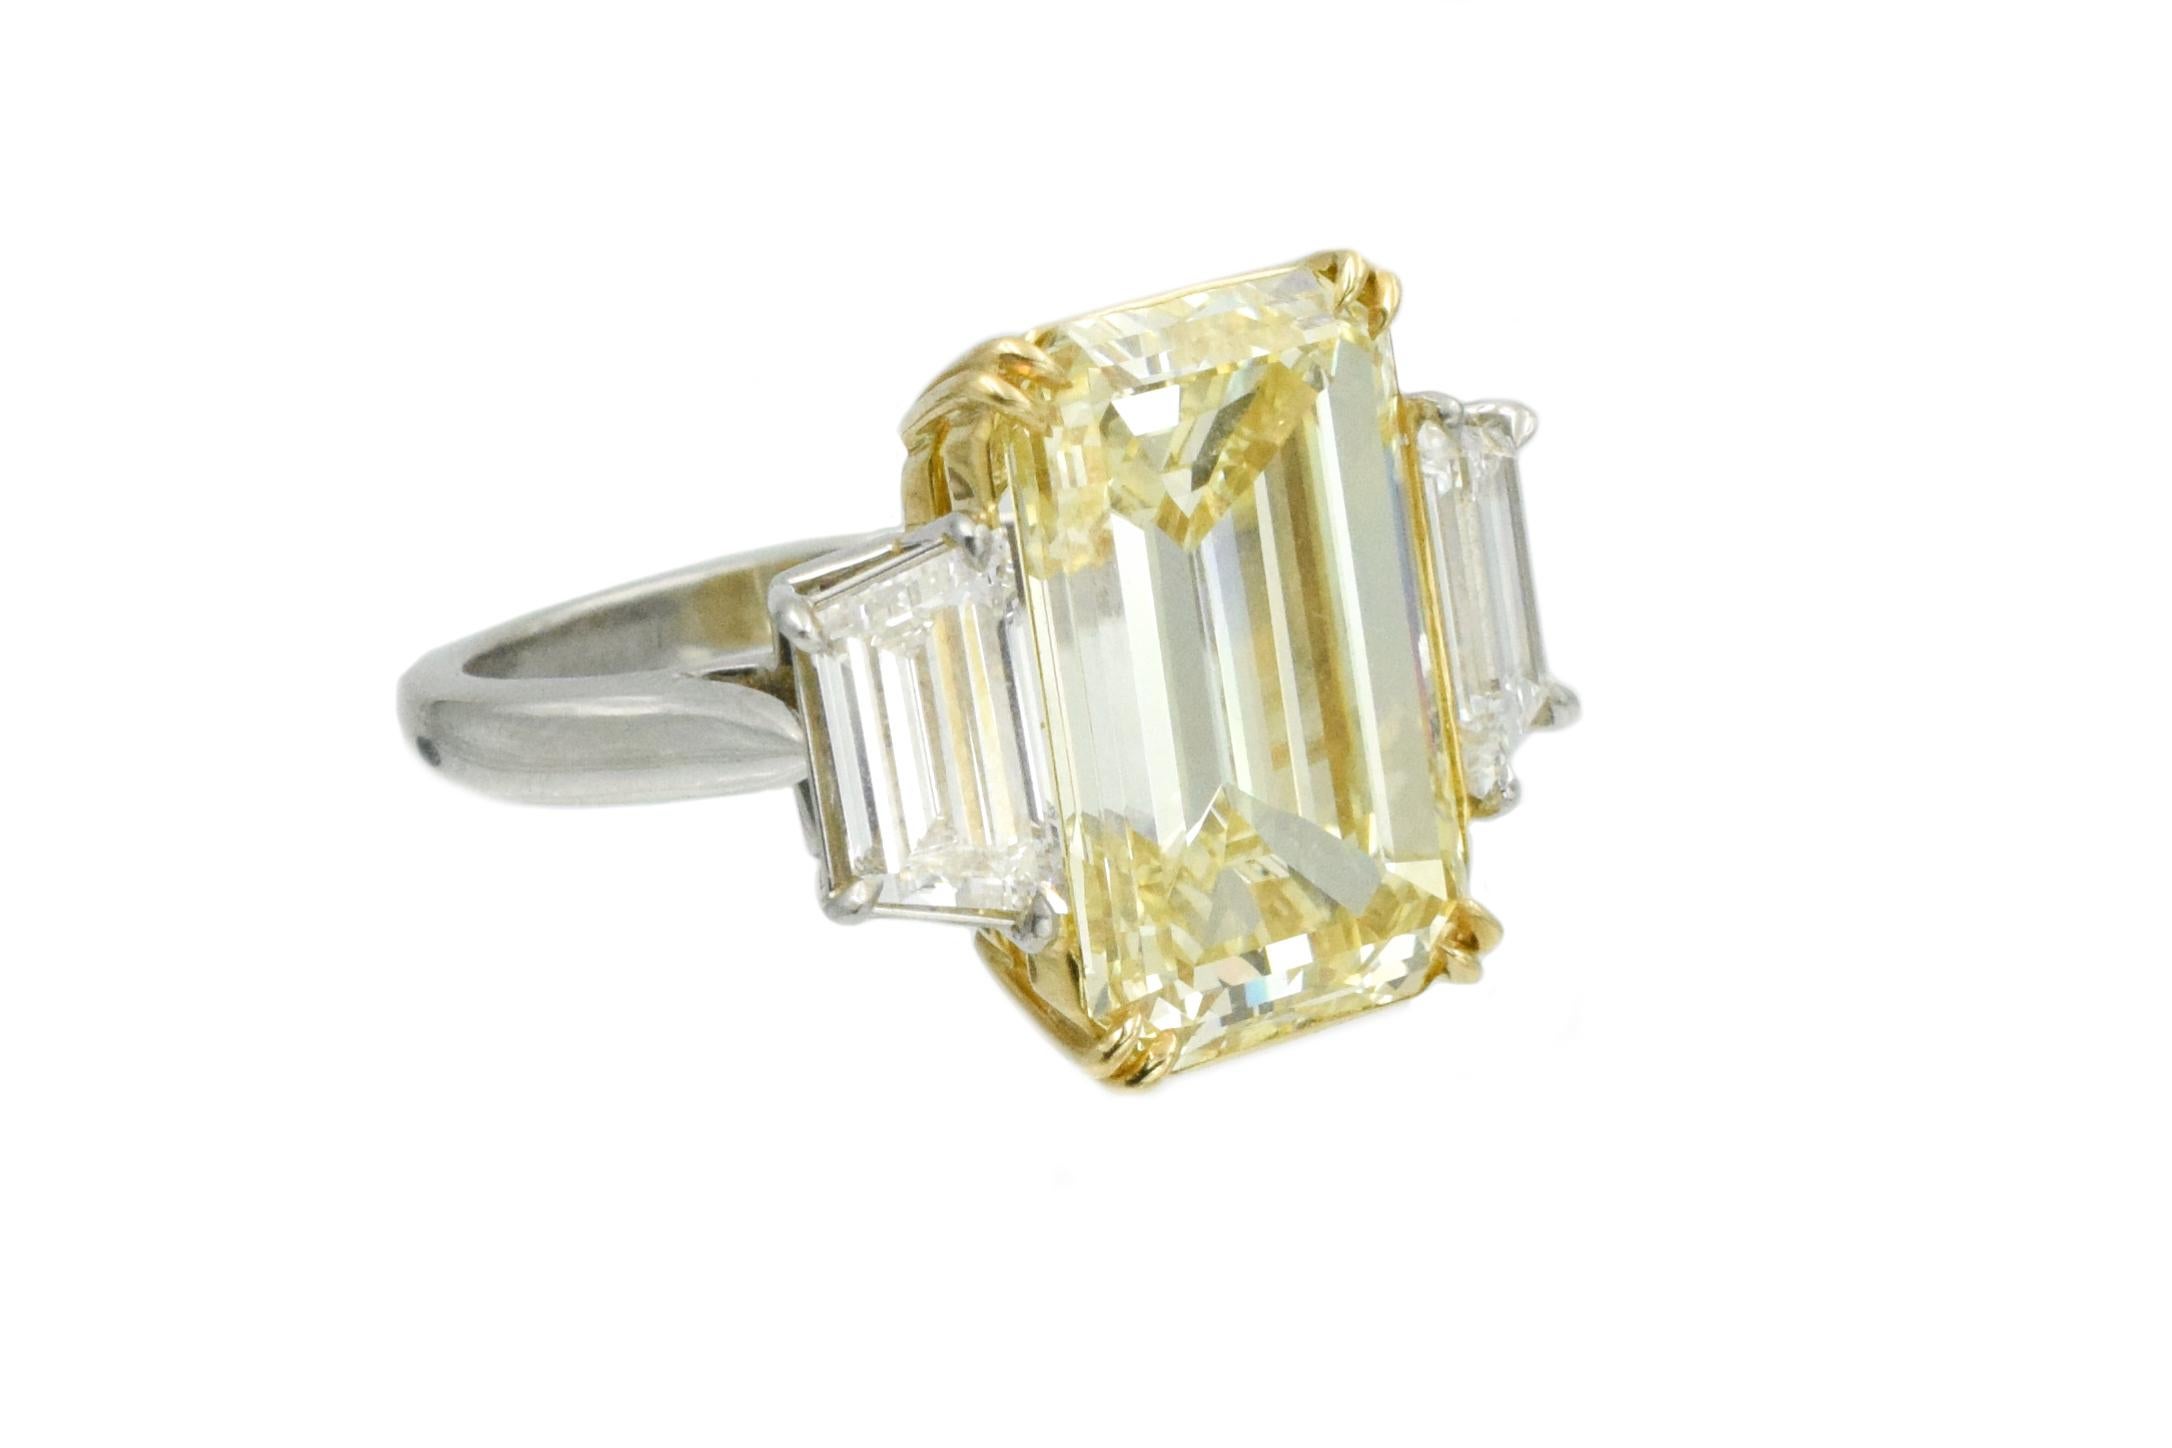 GIA certified 10.00carat rectangular cut diamond flanked by two trapezoid shape diamonds with total weight of  1.00carat 
10.00ct emerald-cut diamond, is color: Fancy Yellow, clarity: VS1 accompanied by GIA report # 1192155808.
Both trapezoids